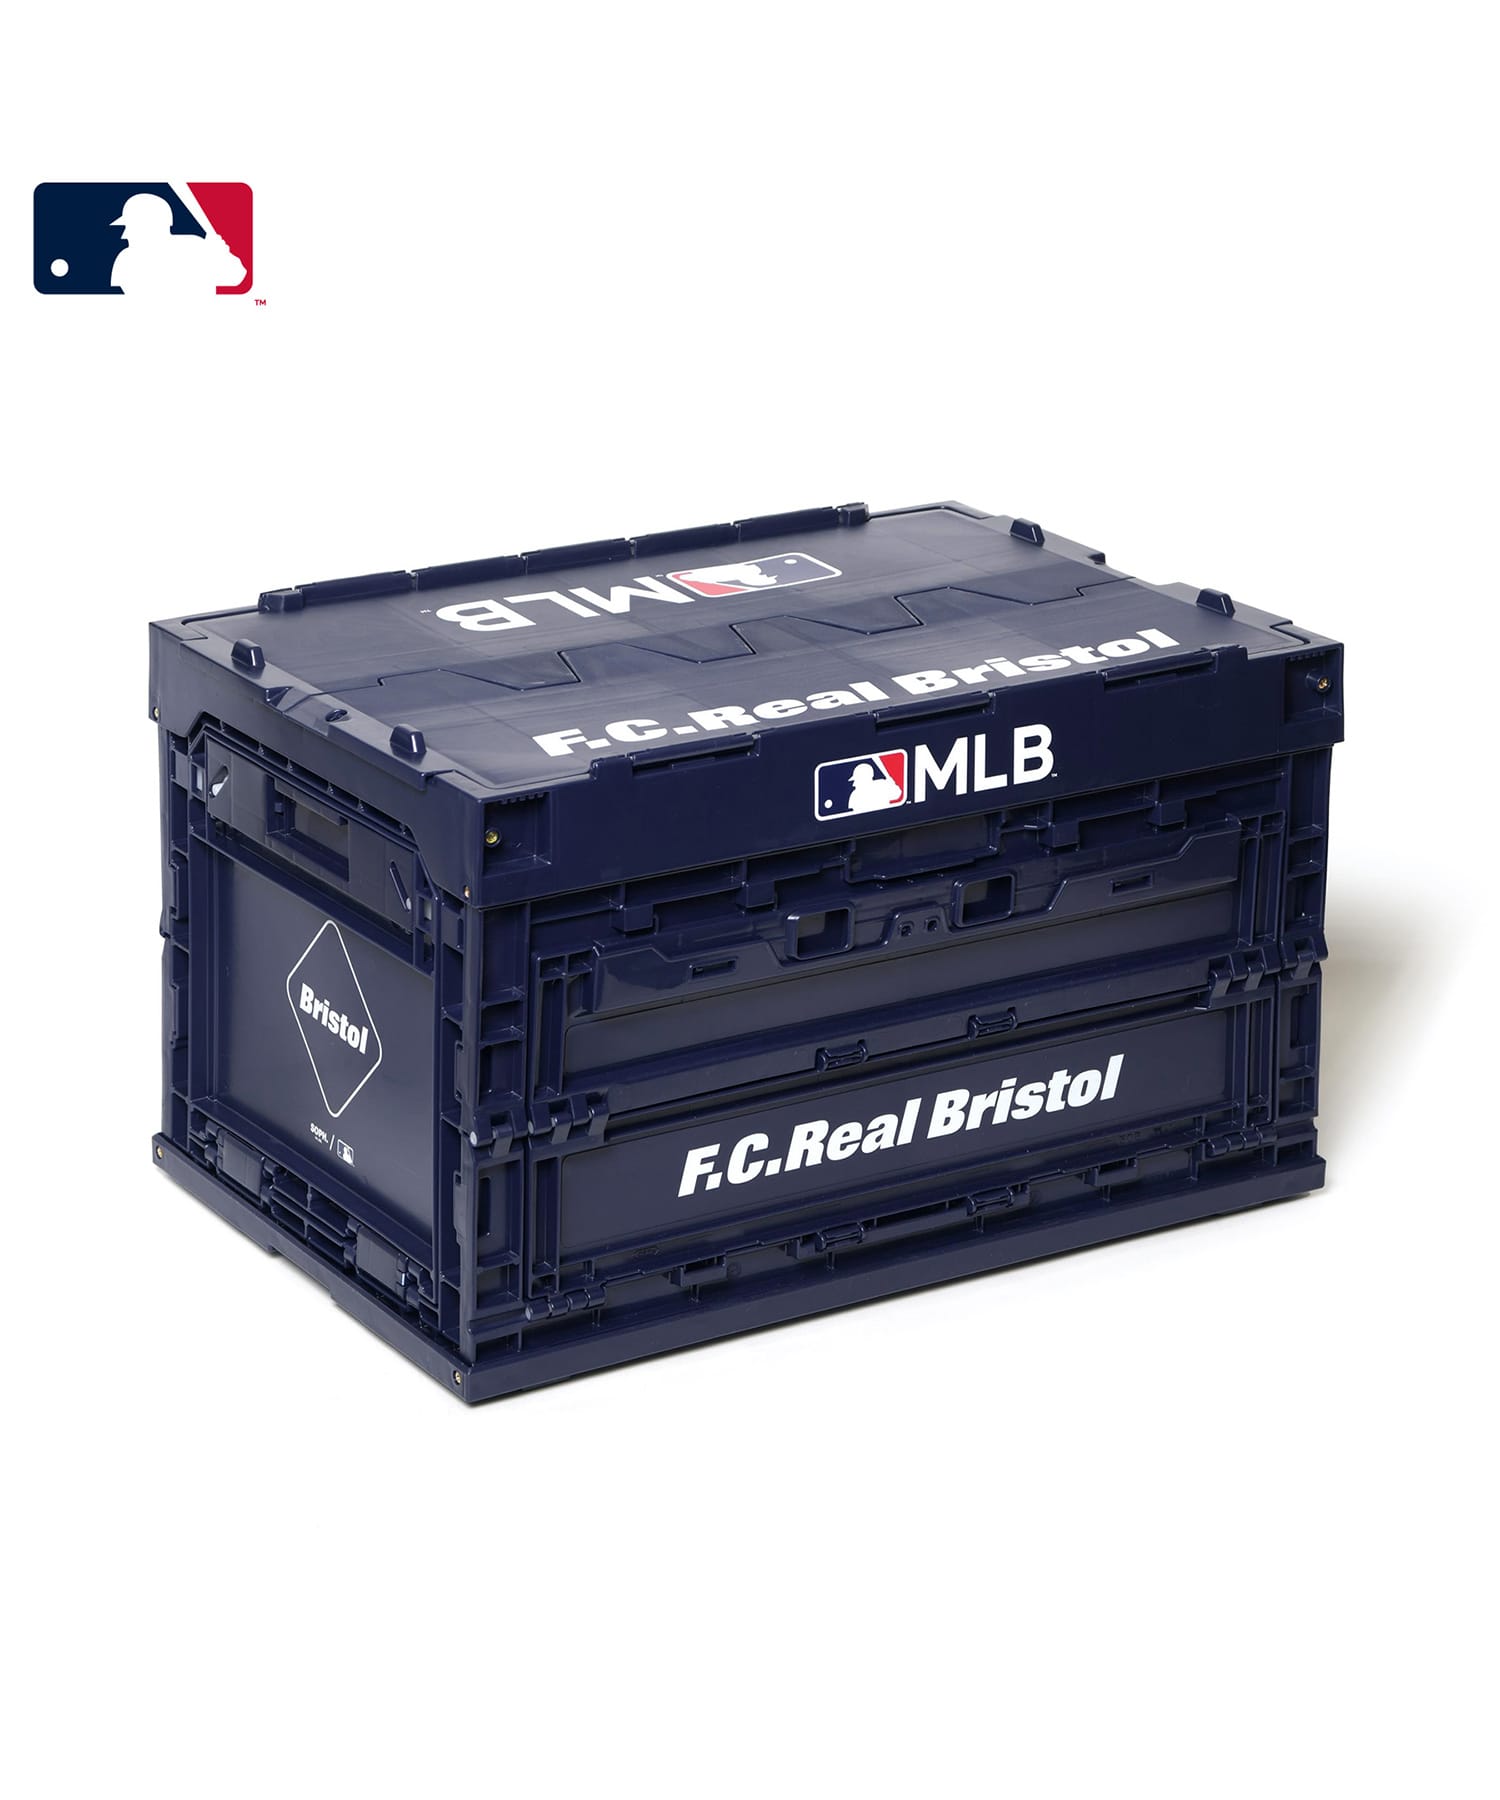 MLB TOUR LARGE FOLDABLE CONTAINER | F.C.Real Bristol